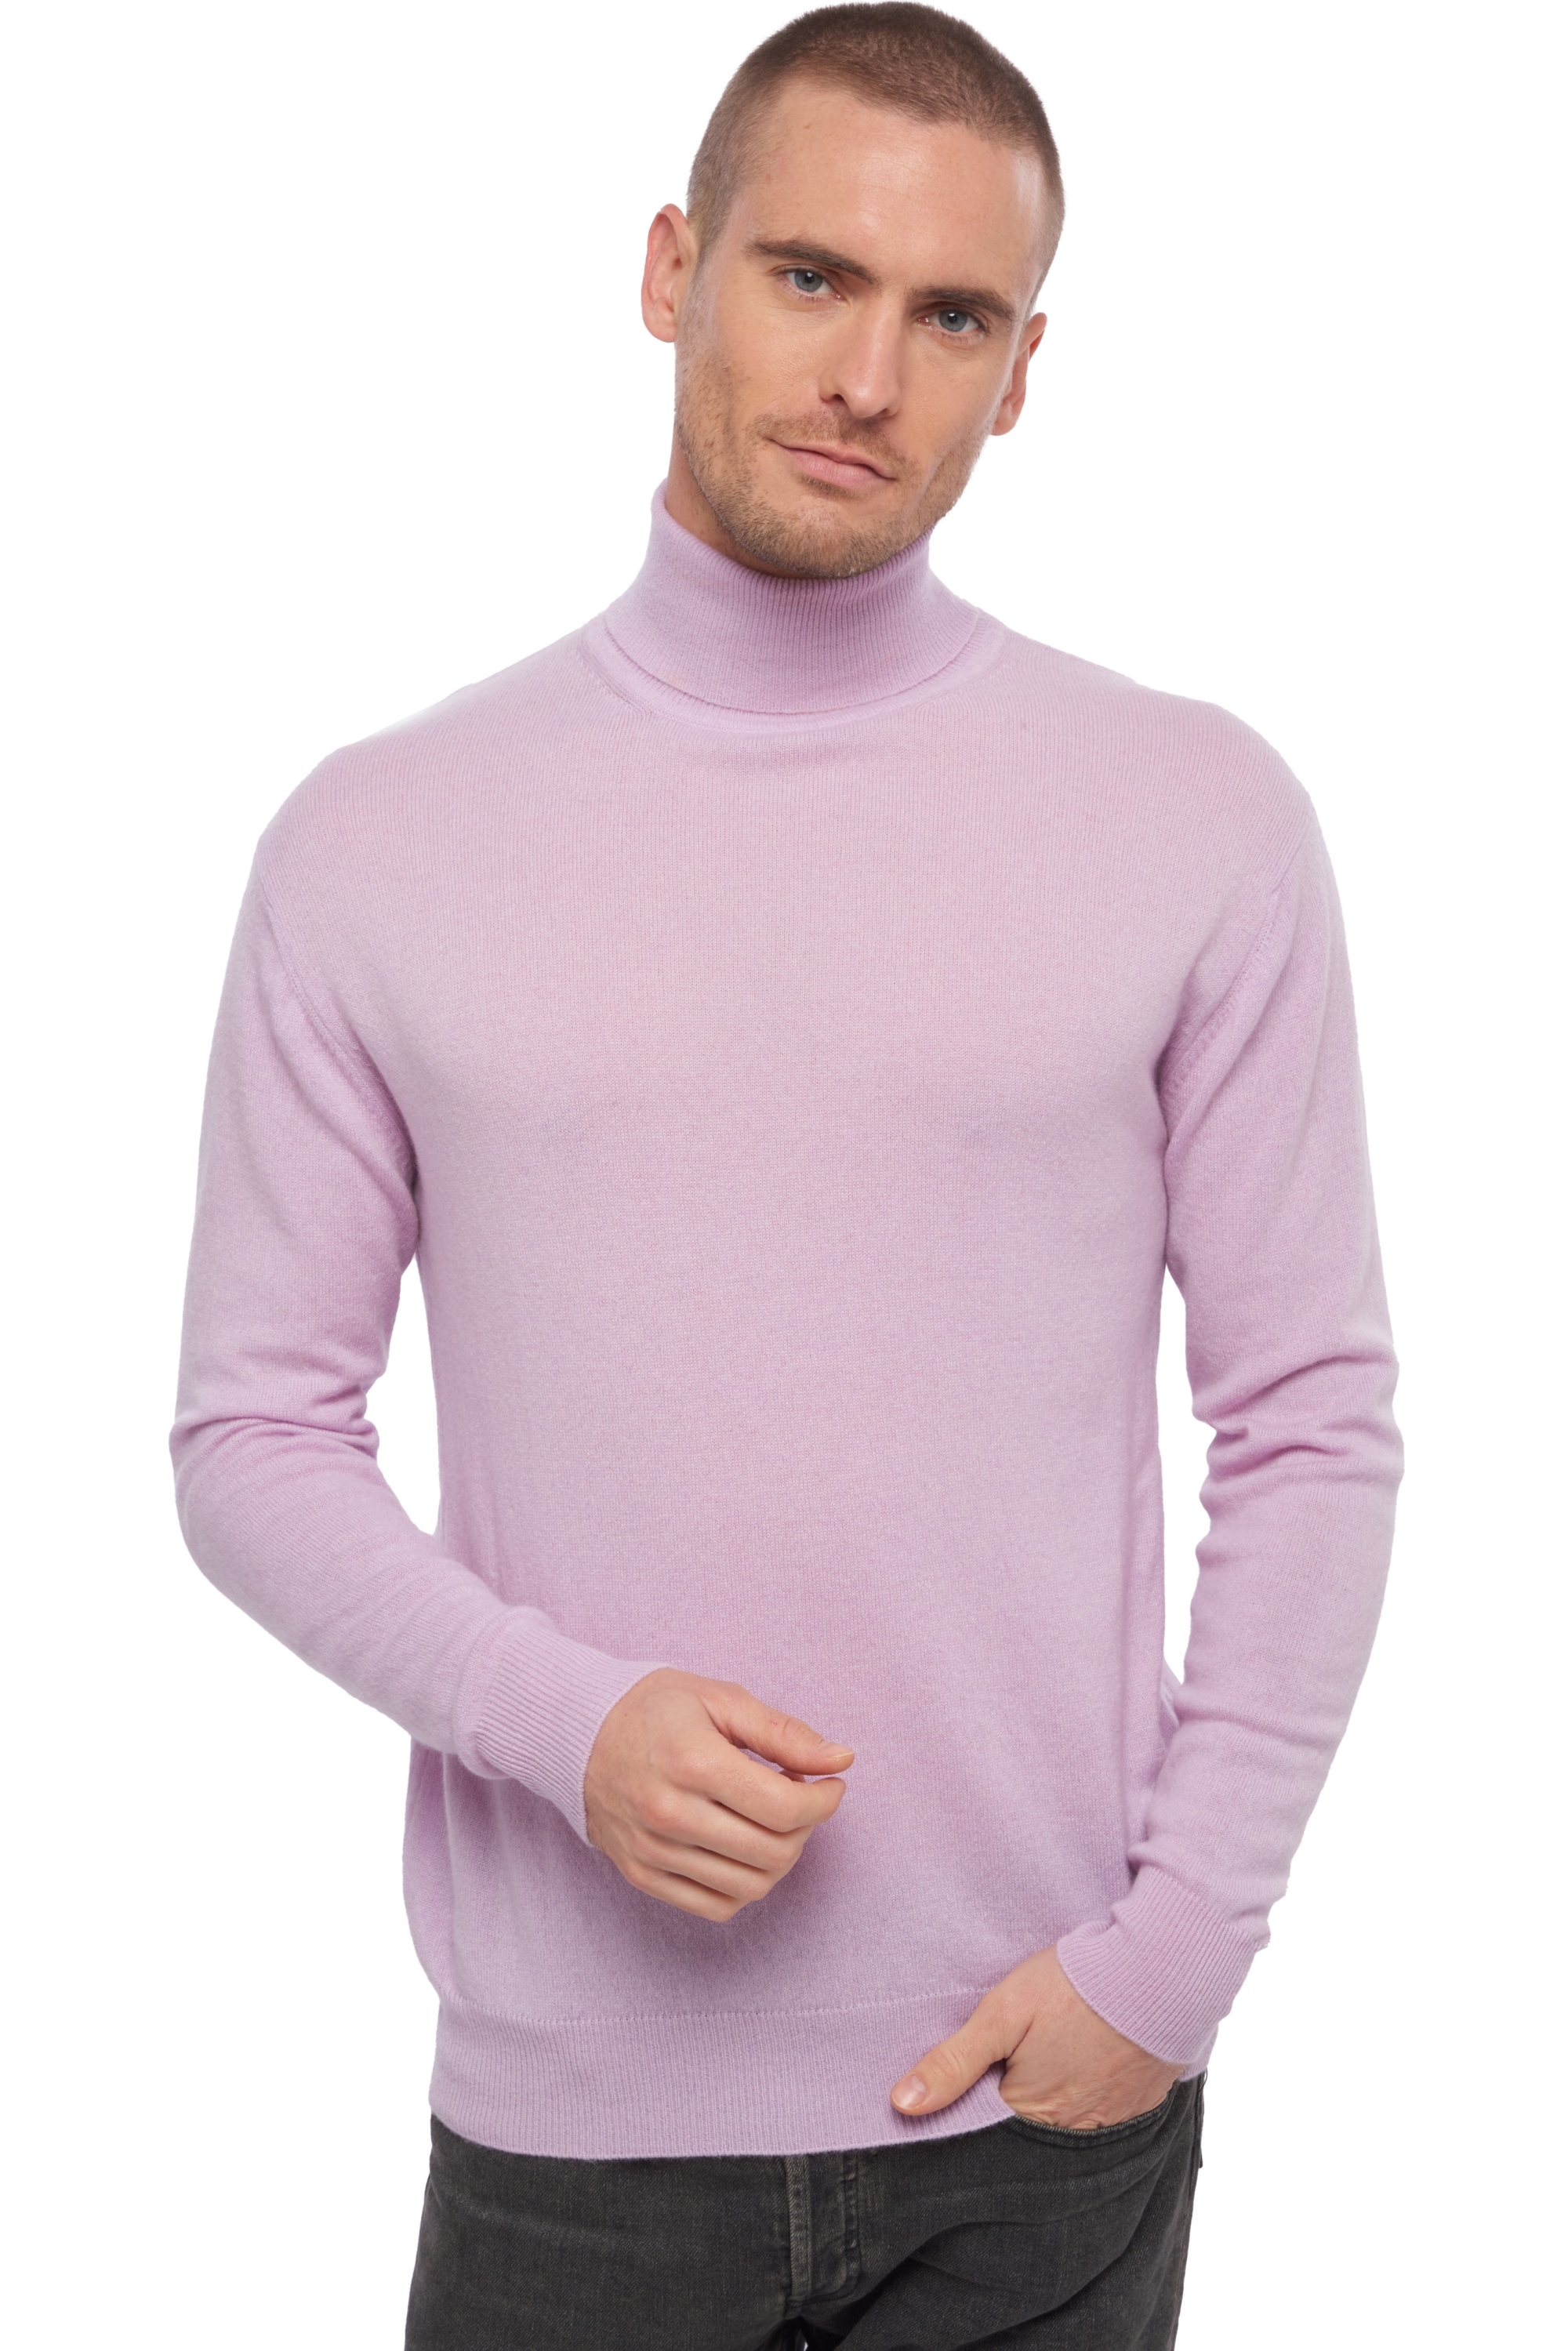 Cachemire pull homme edgar lilas l